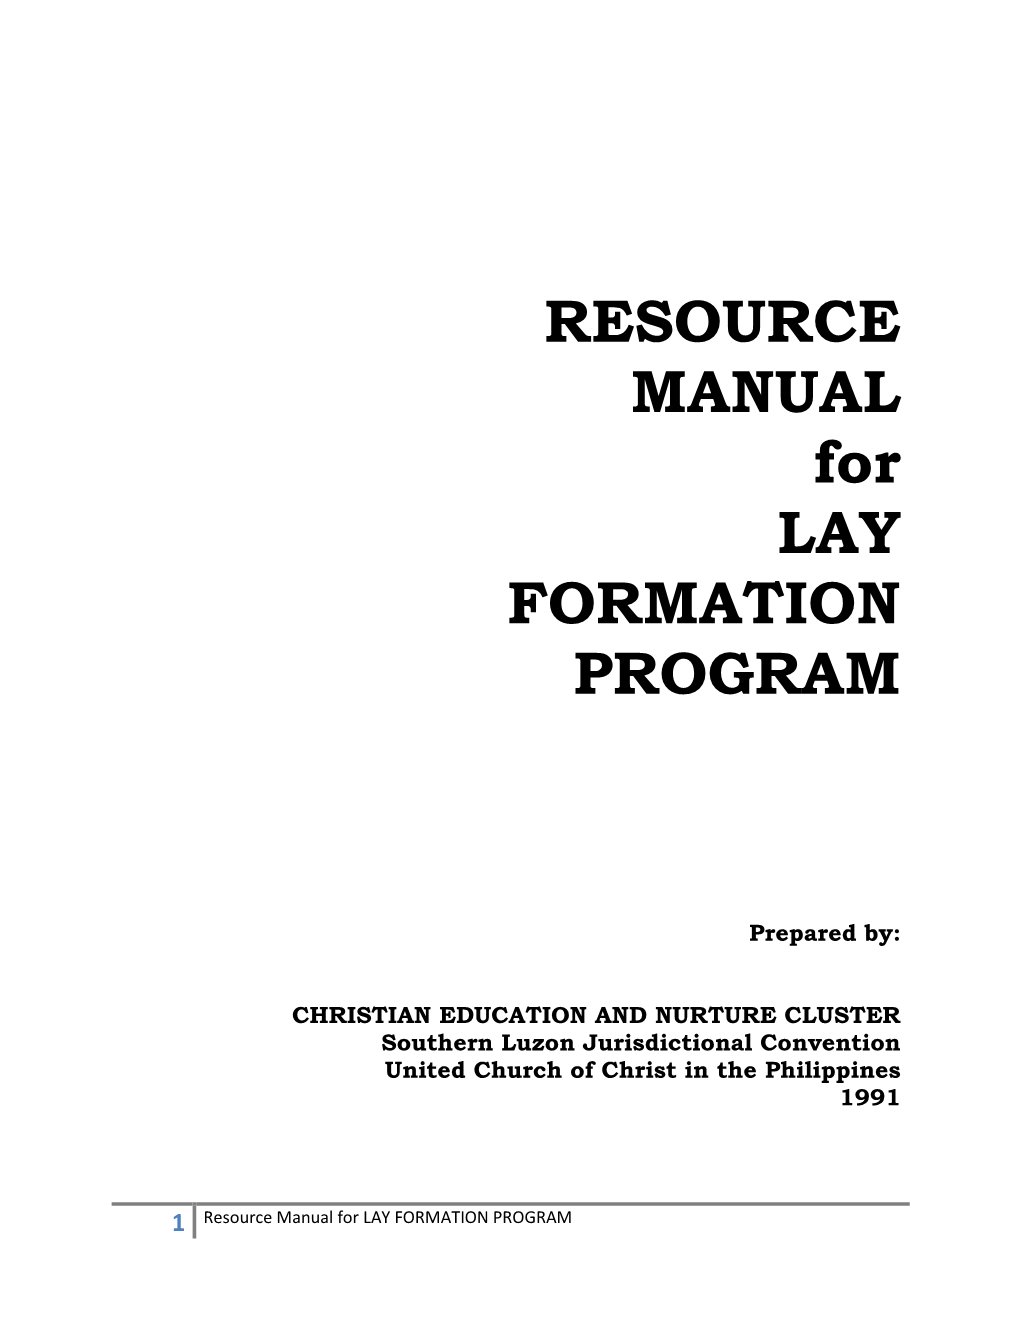 RESOURCE MANUAL for LAY FORMATION PROGRAM